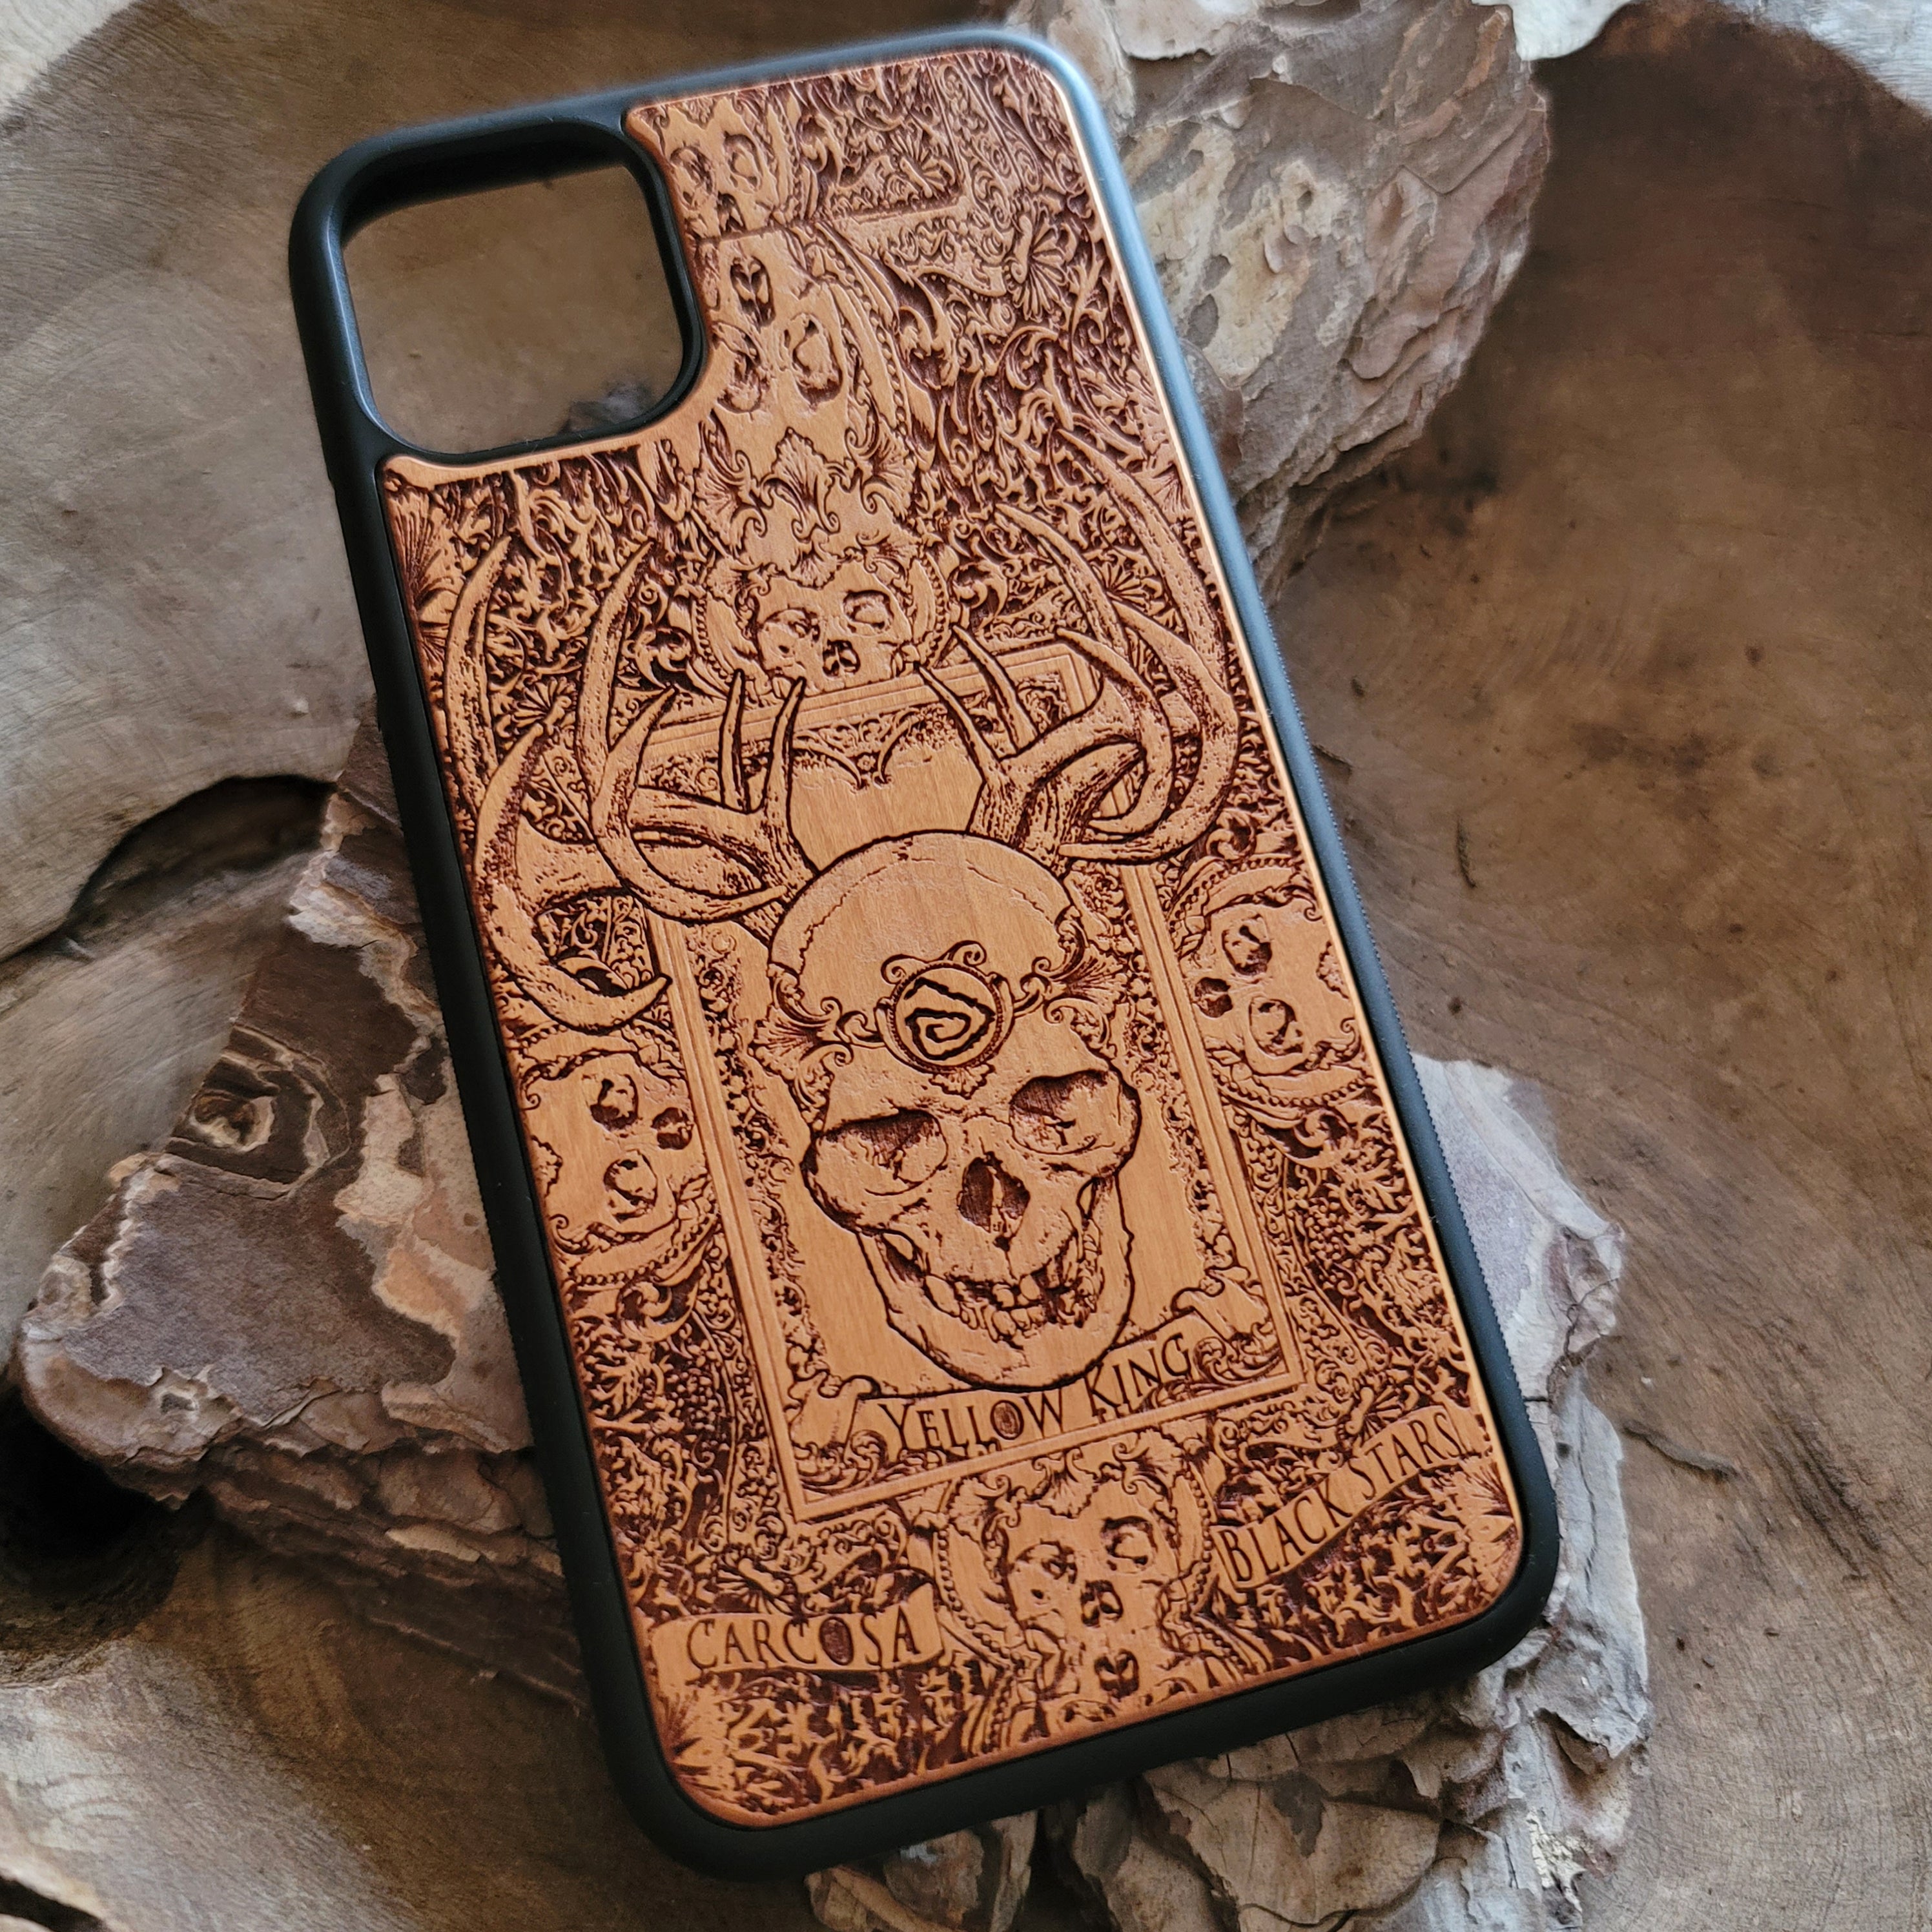 Horned Skull Wood Phone Case "The Yellow King"